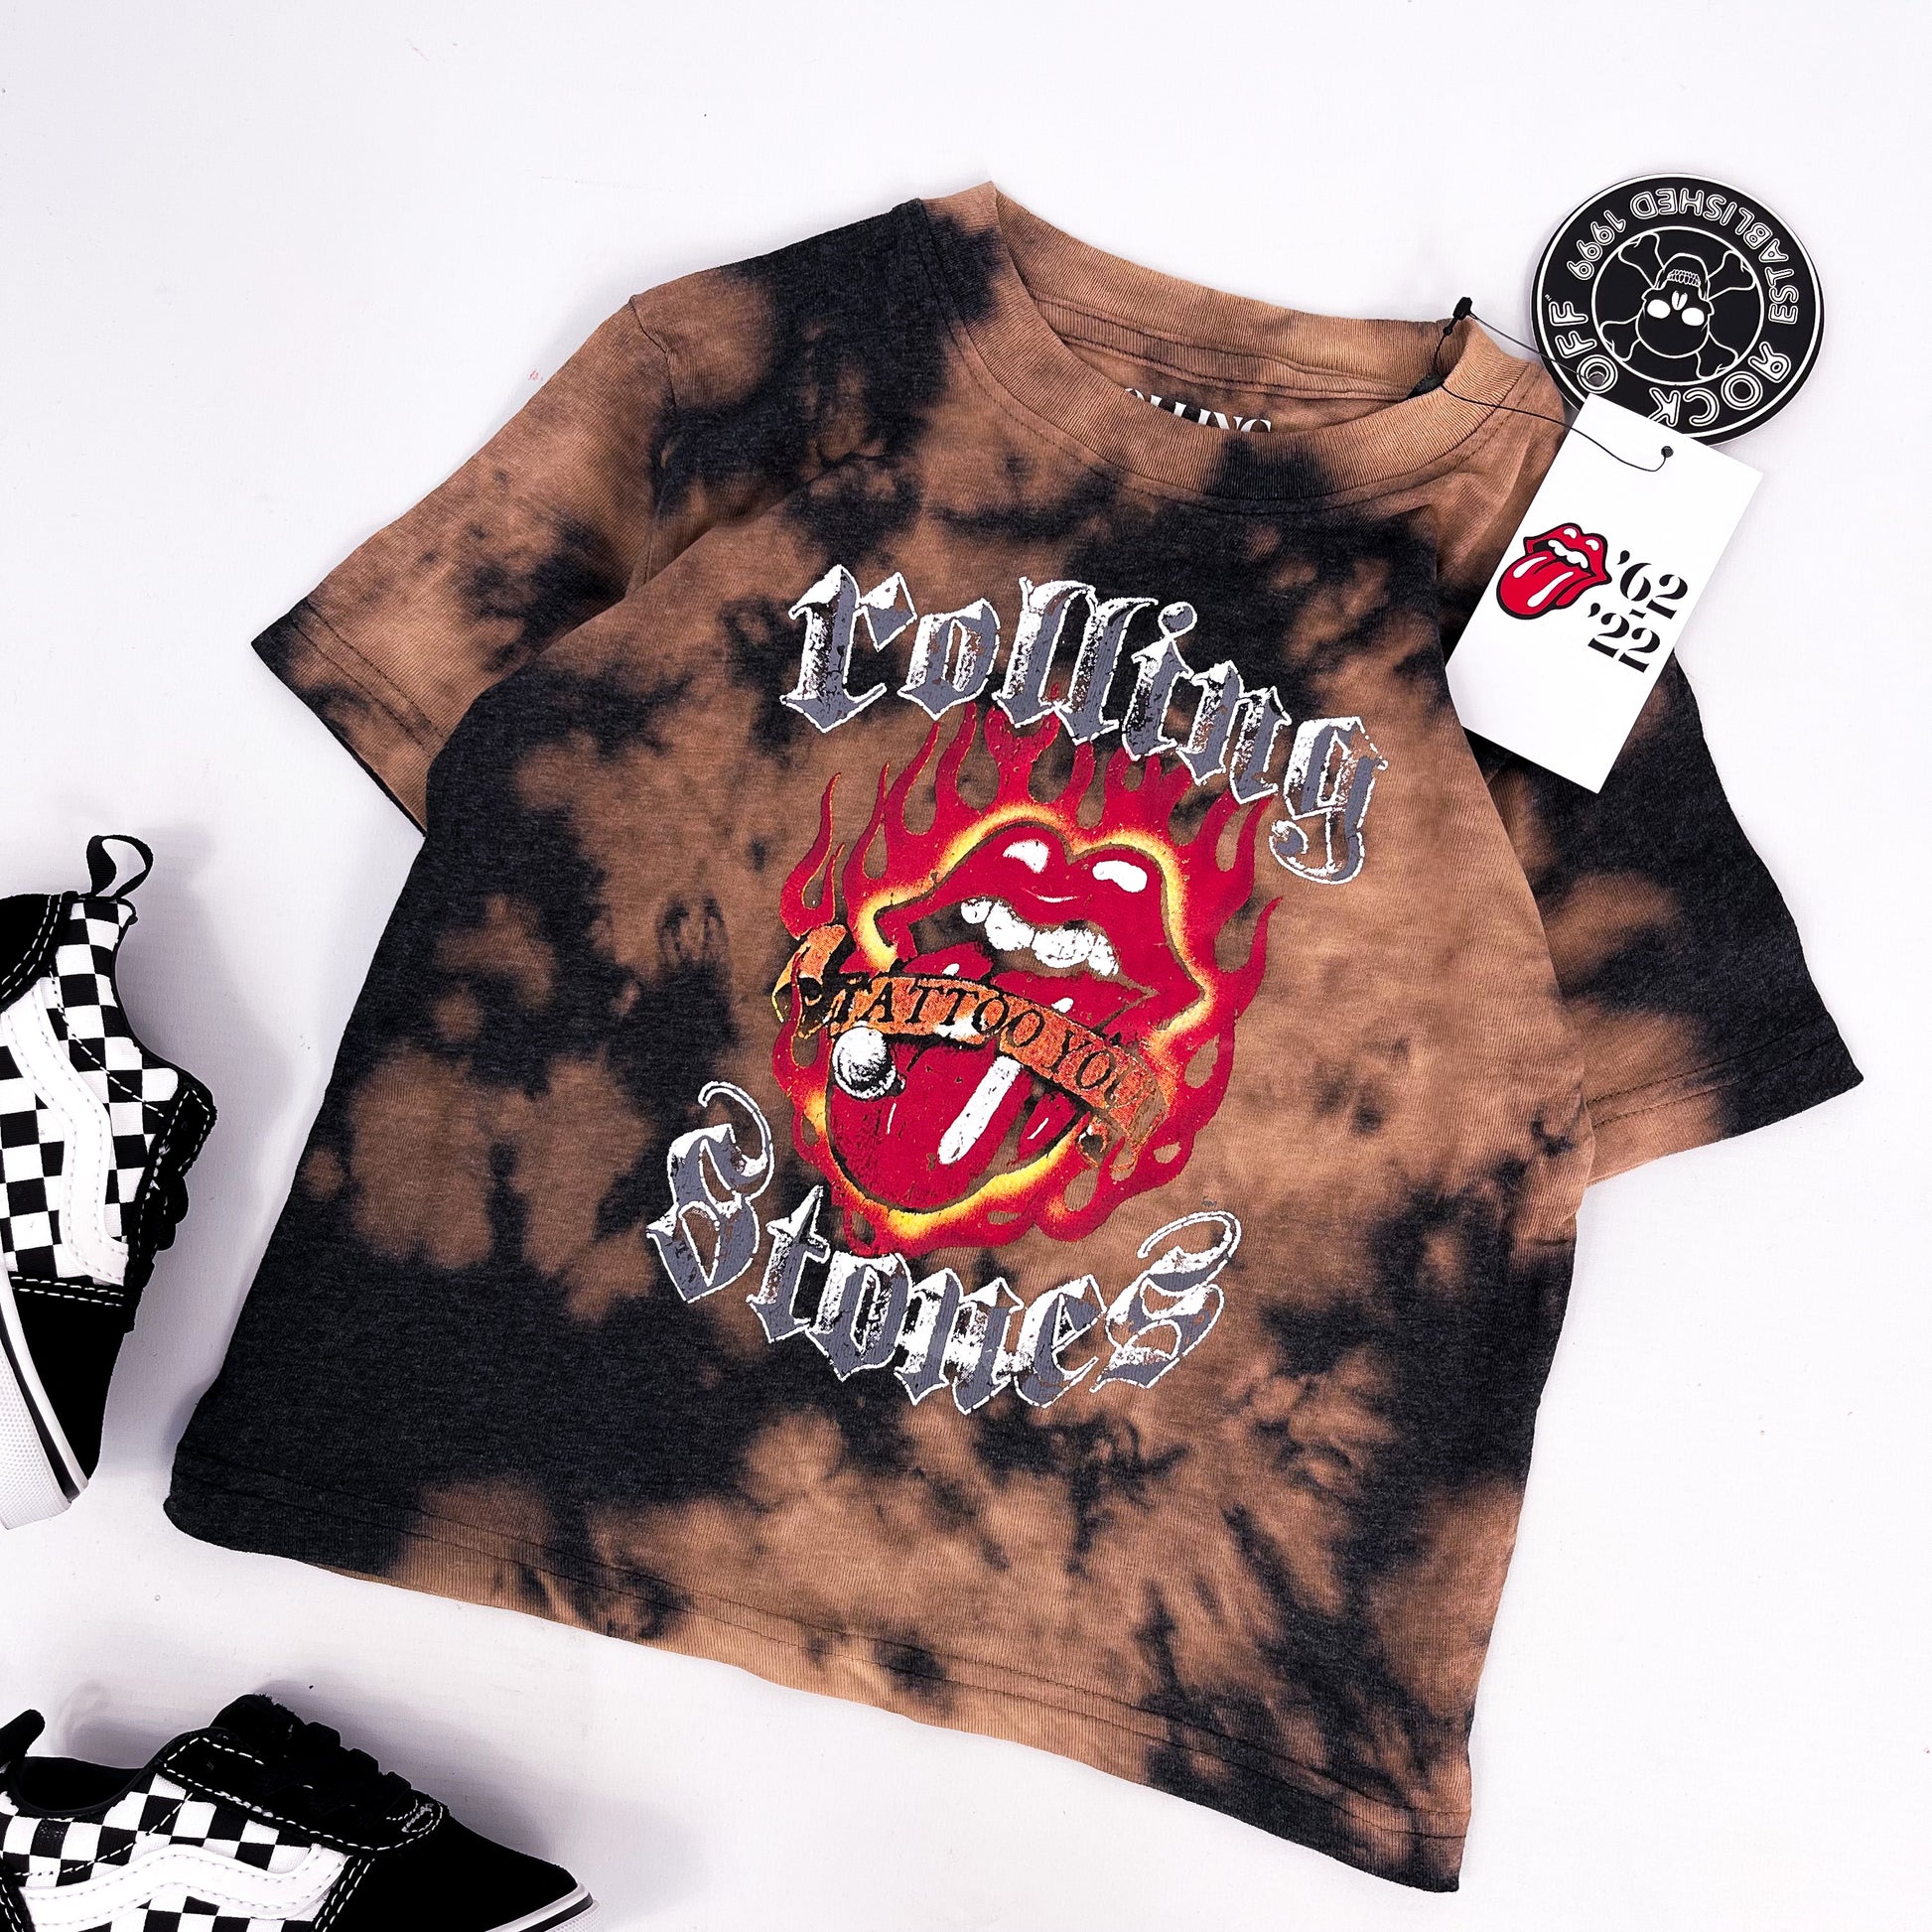 Kids Rollling Stones band t shirt, "Tattoo You" with flaming tongue and lips